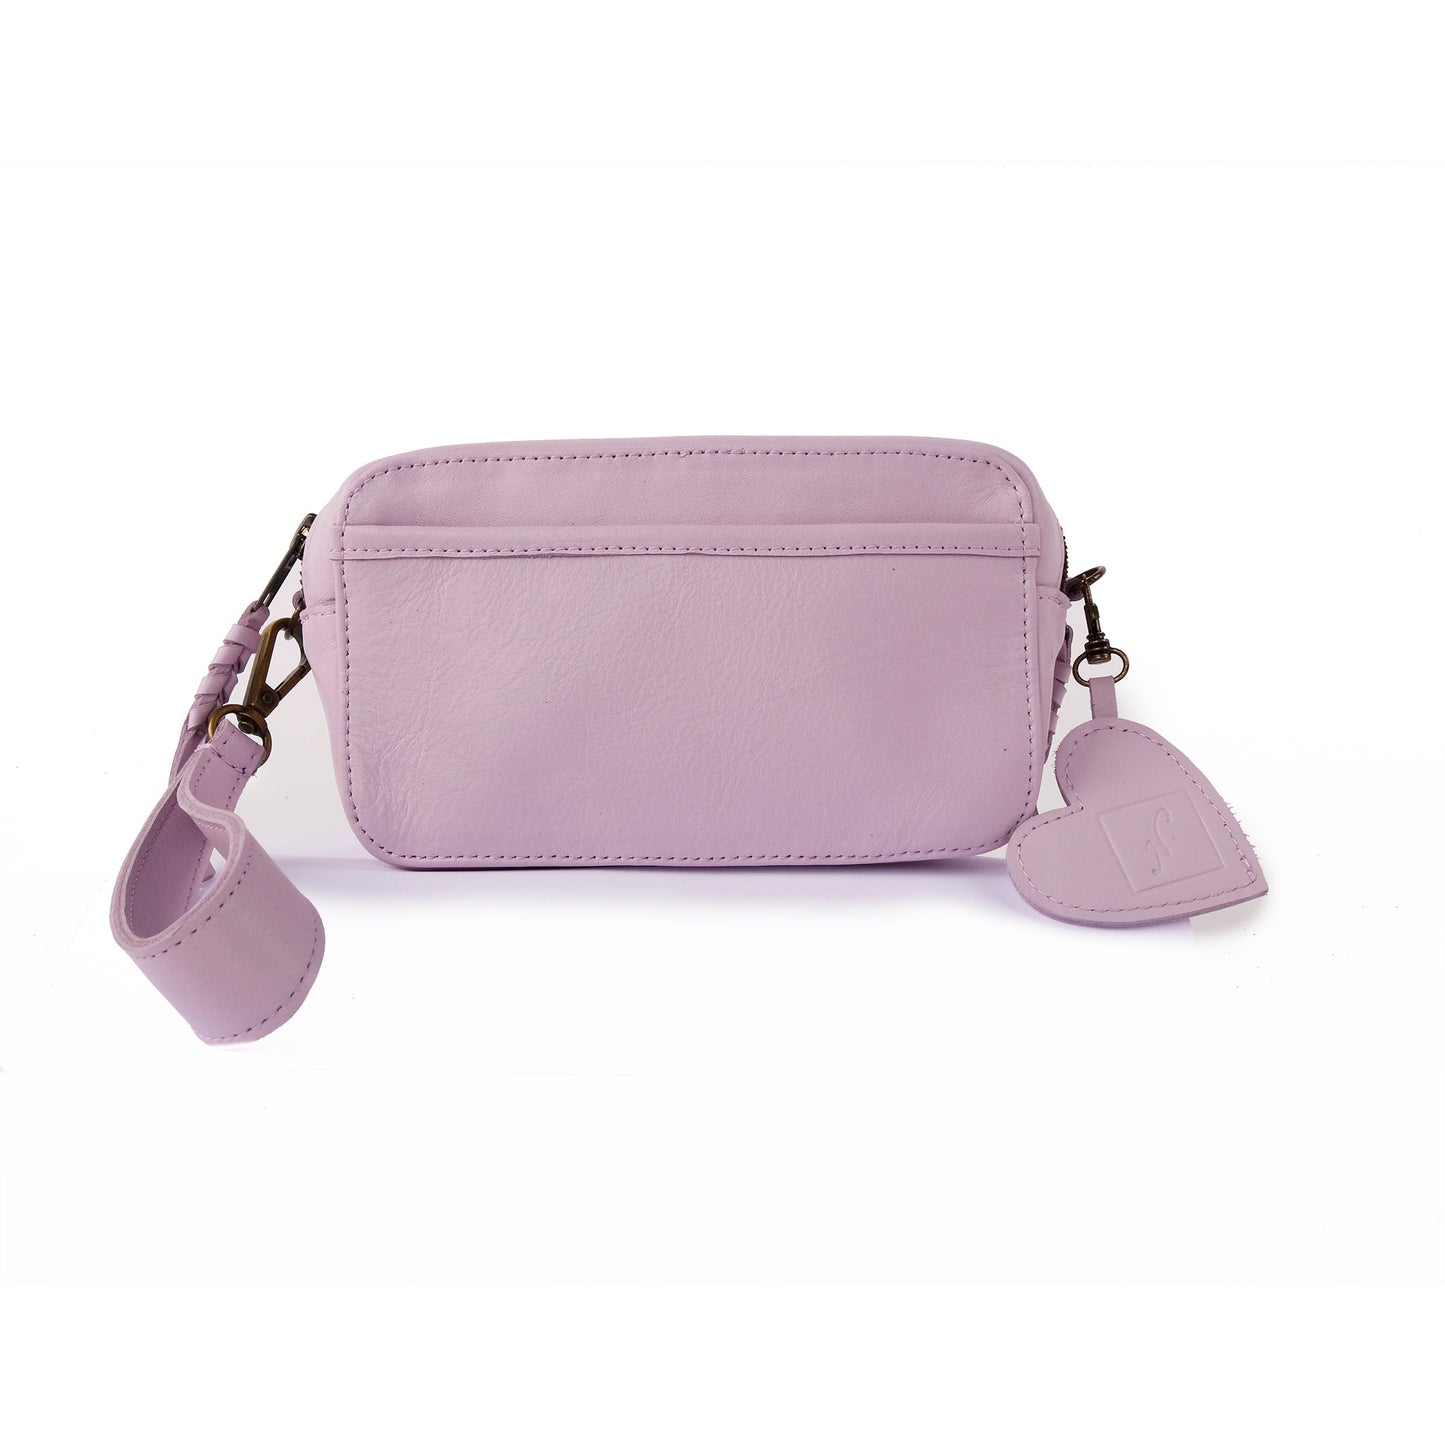 ESSENTIALS BAG - FULL LEATHER COLLECTION - LAVENDER